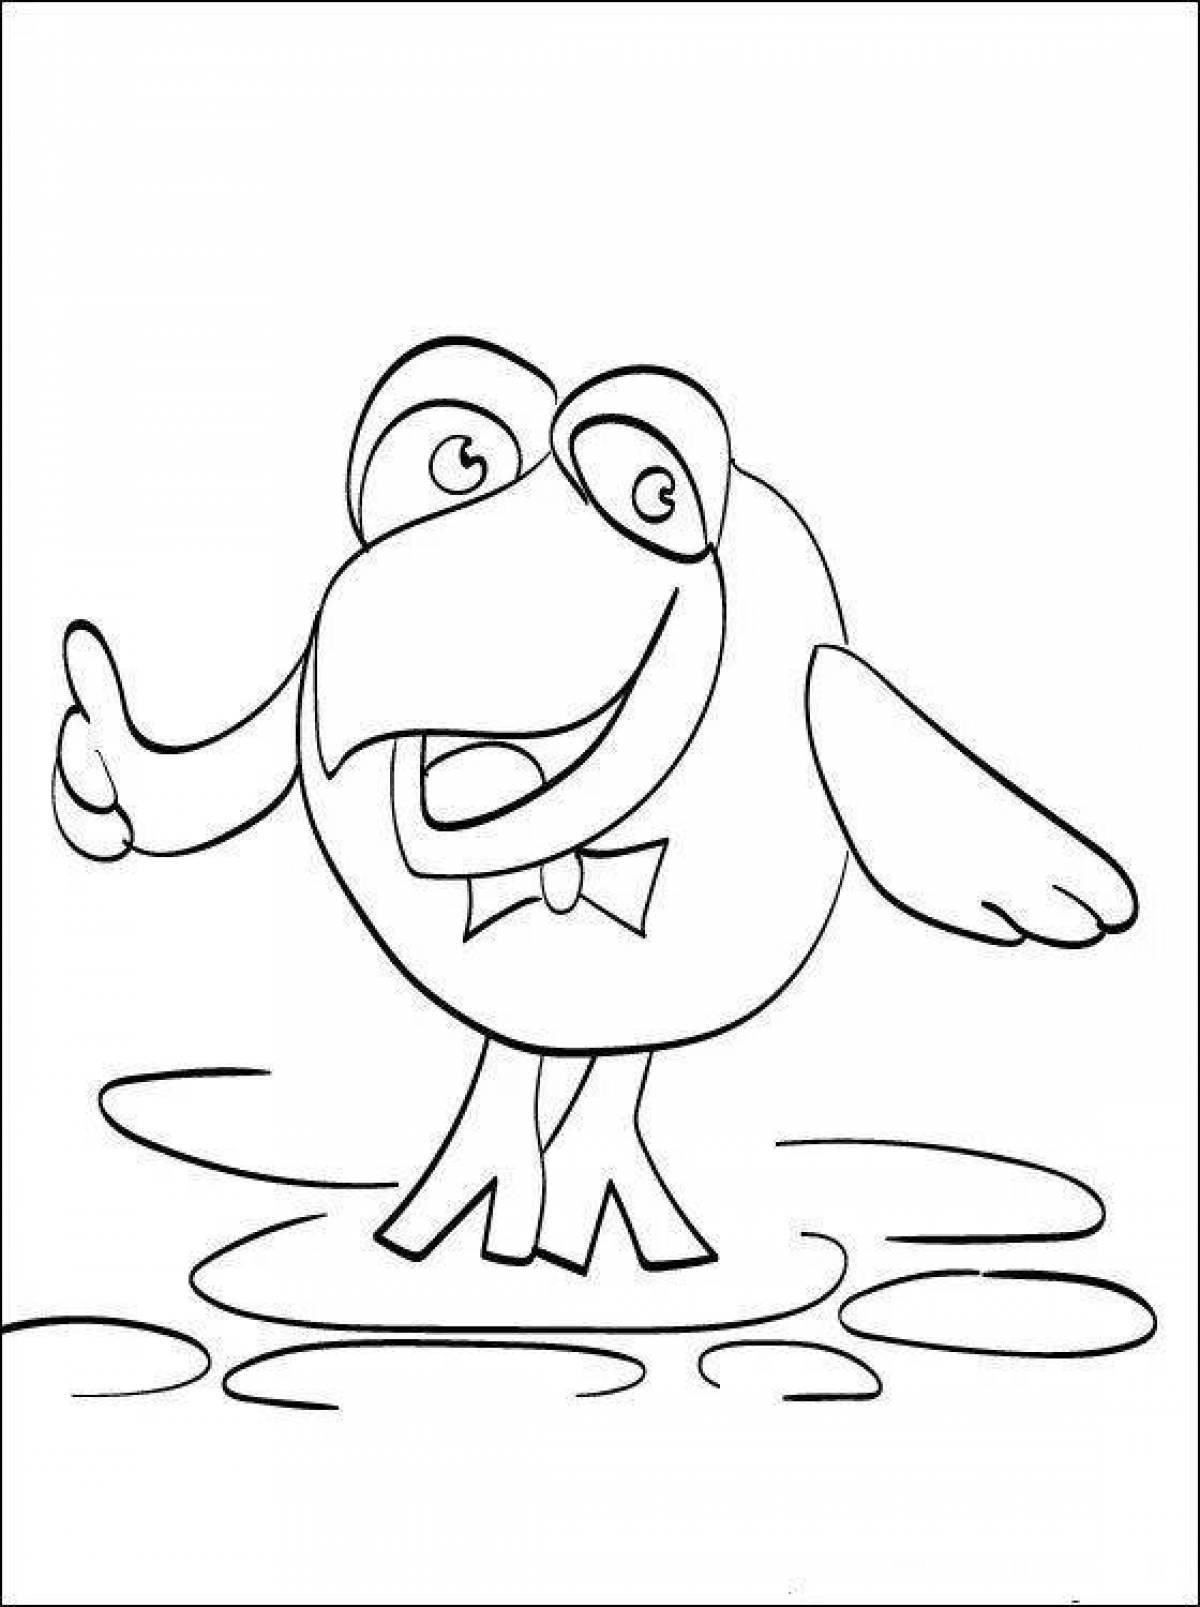 Color-lively kar karych coloring page